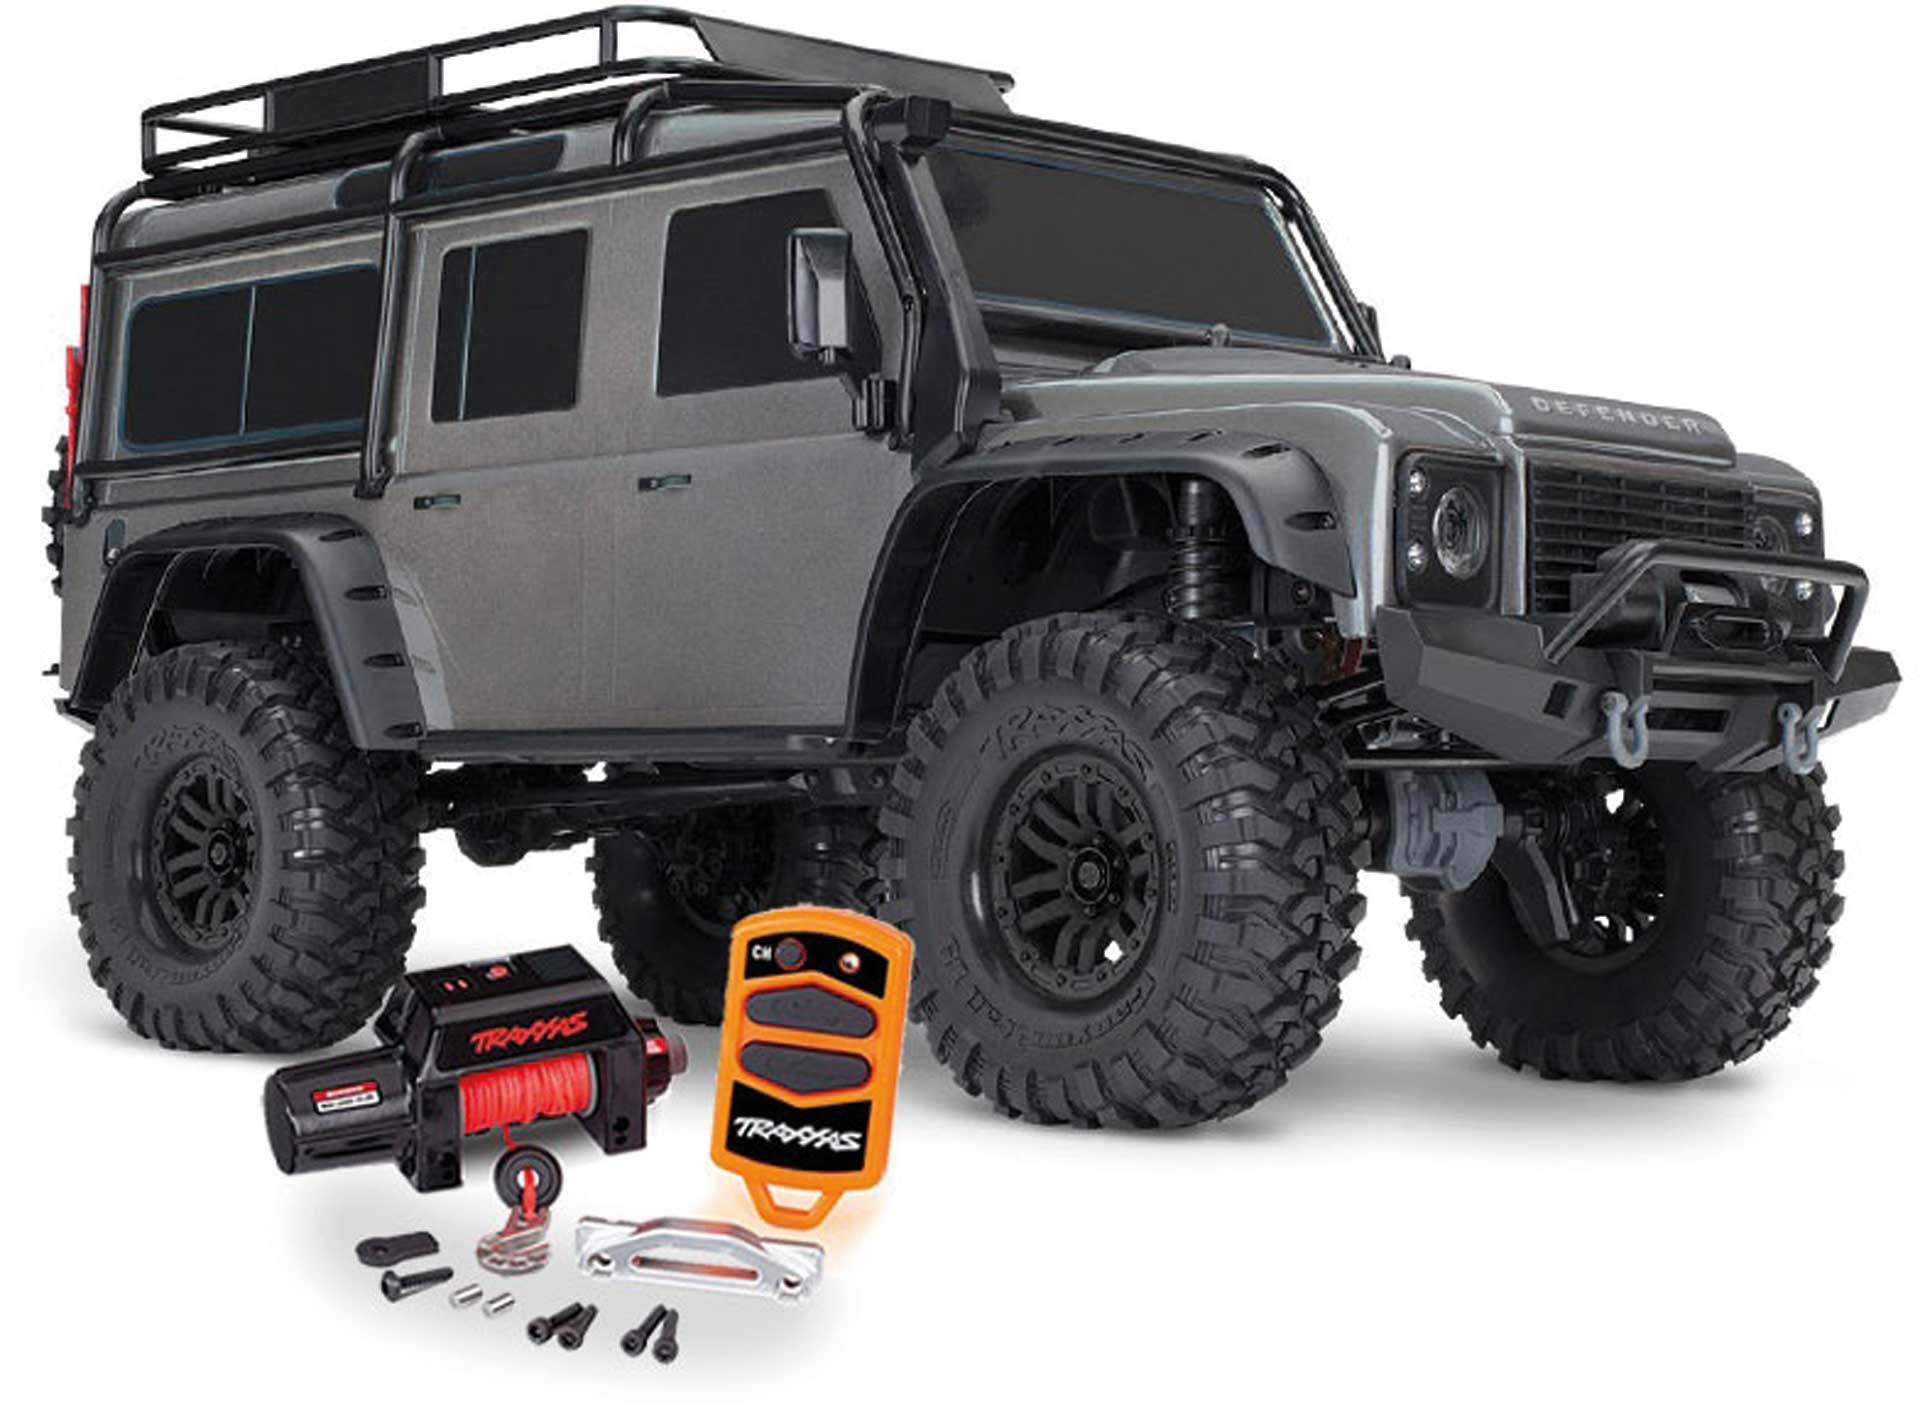 TRAXXAS TRX-4 Land Rover Defender silver 1/10 4X4 RTR Scale Crawler Brushed with winch